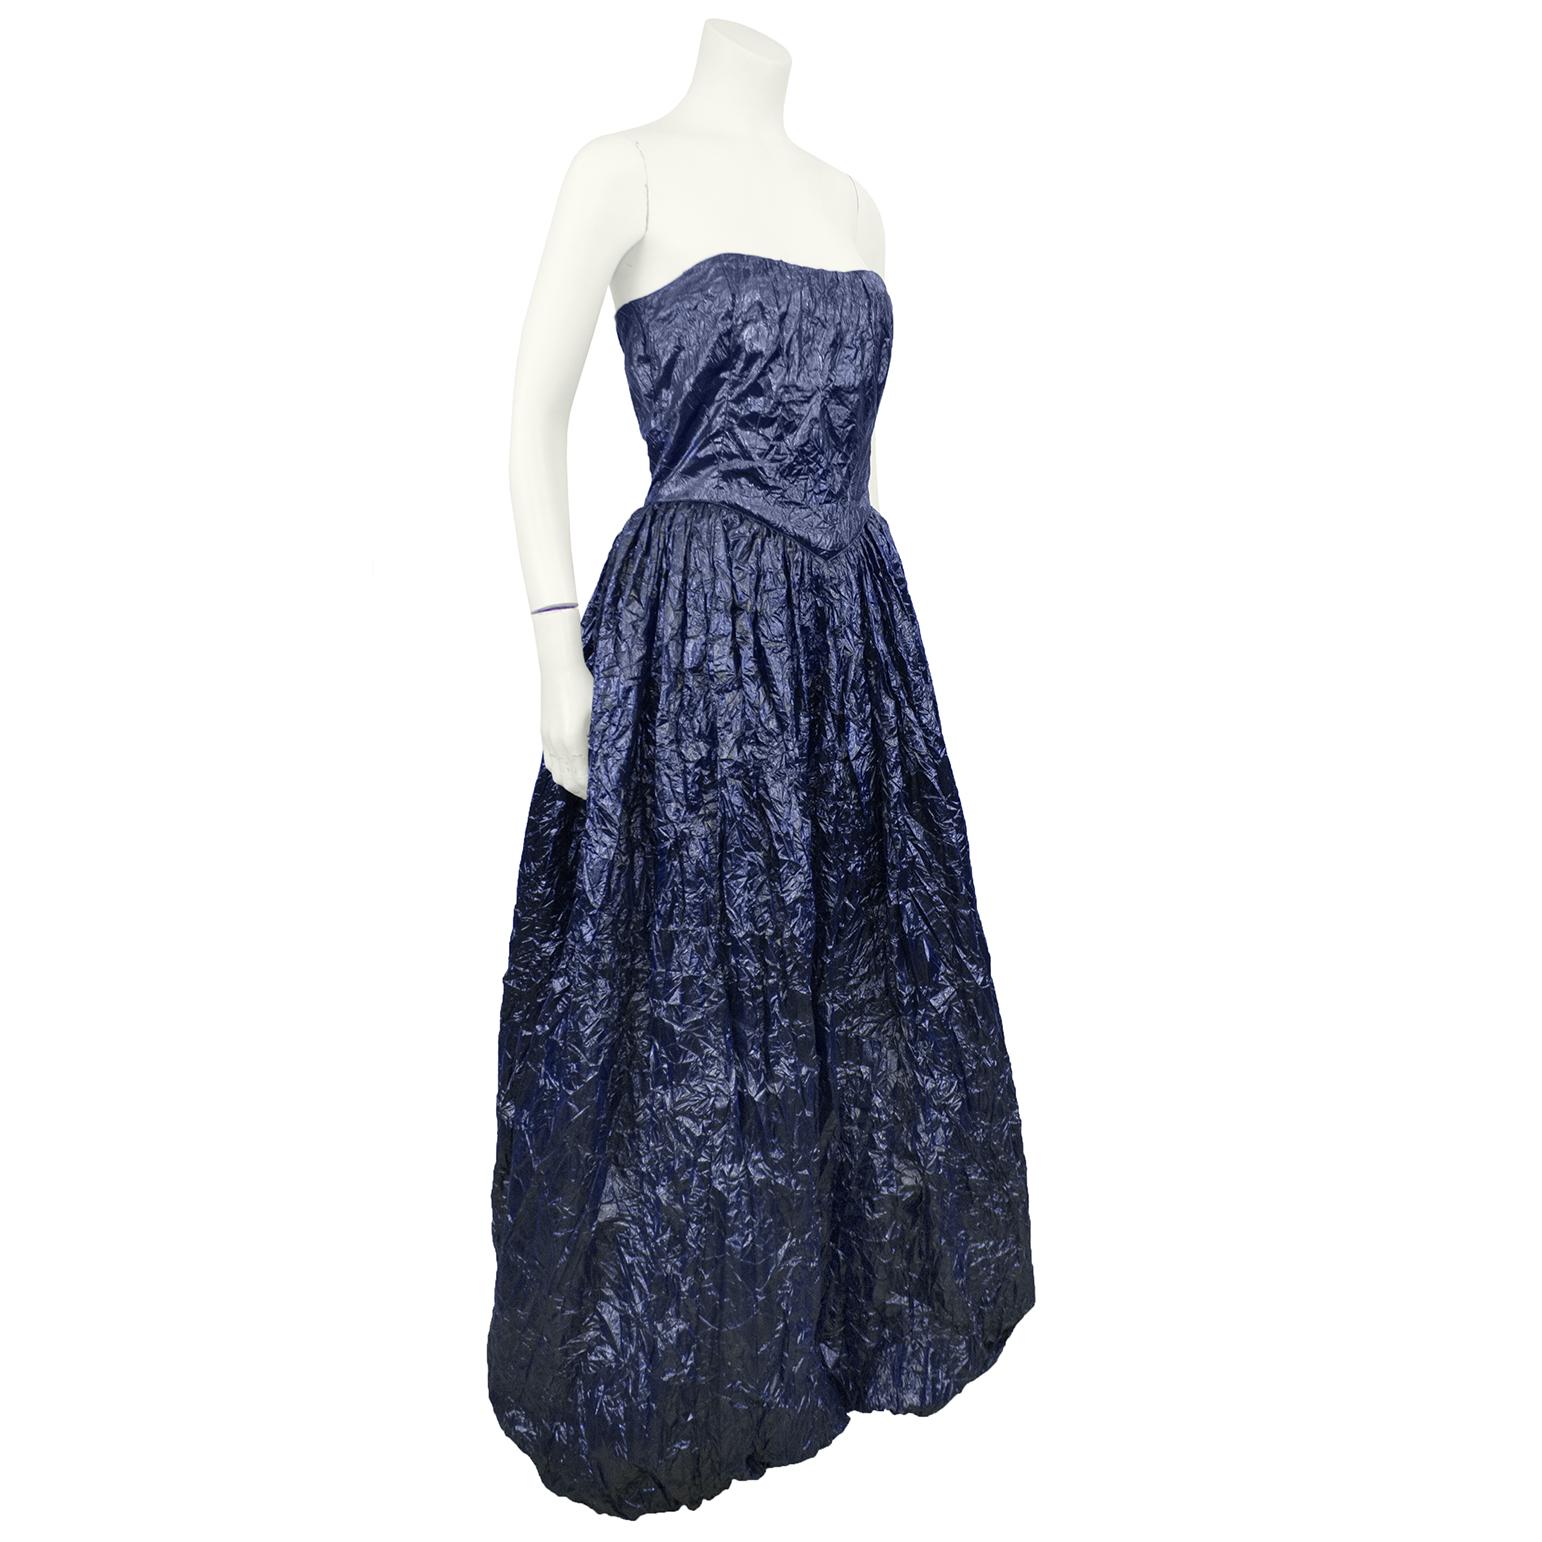 Very unique Krizia strapless gown from the 1980s made for Chez Catherine. The dark navy lurex and nylon blend fabric has a treated crinkle texture resembling a trash bag. The dress is princess style with a bubble hem and dipped V corset waist. Zips